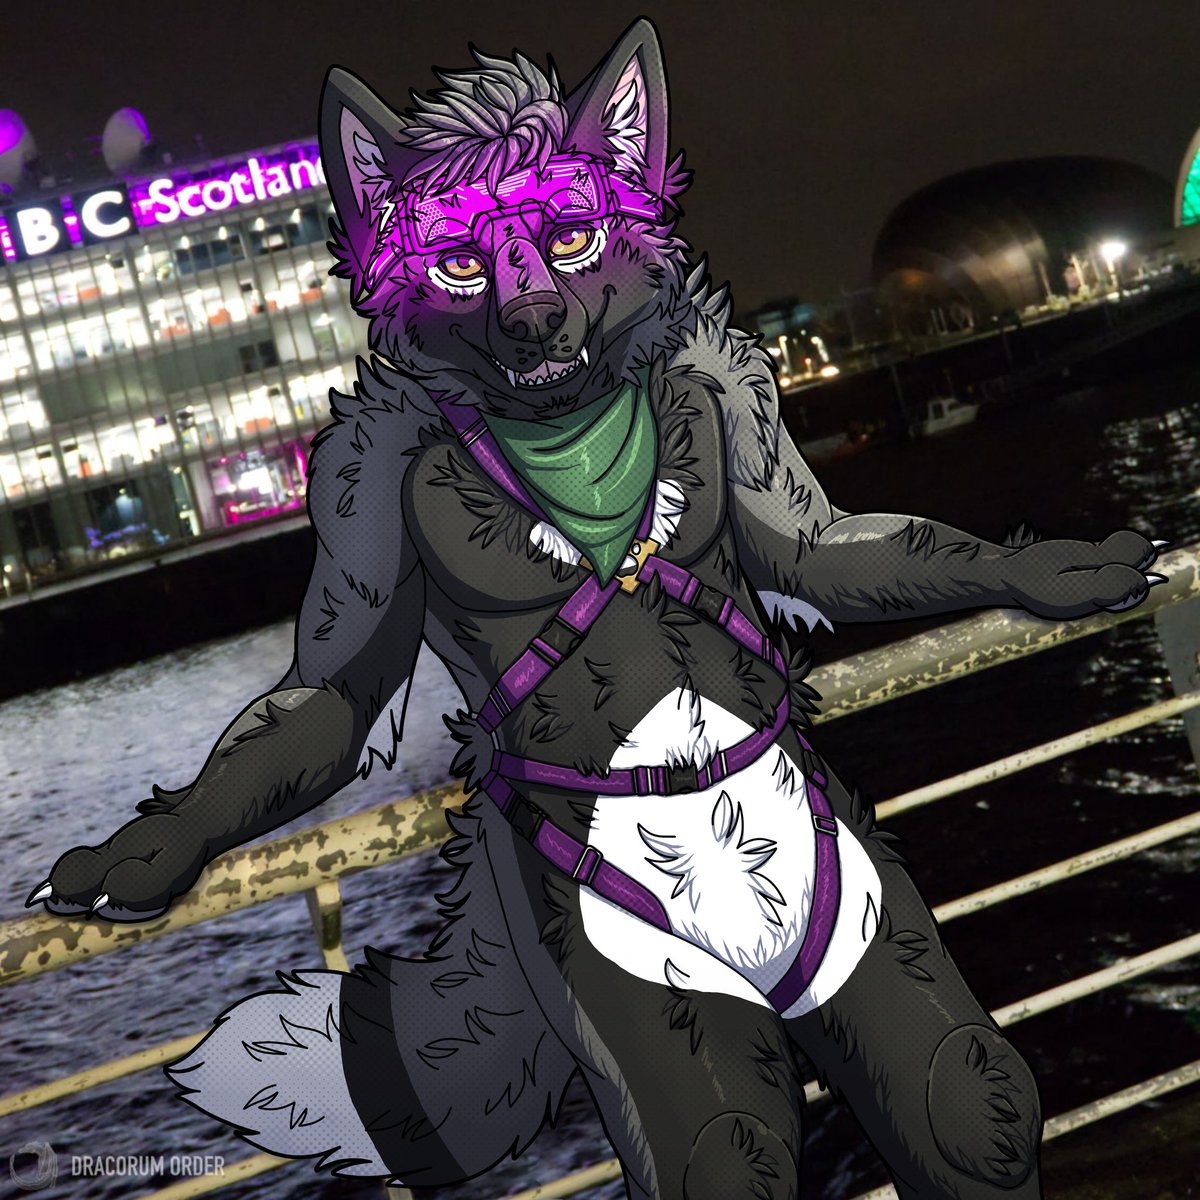 Silver fox roaming in the night~ 🌃 Sick drawover by @DracorumOrder 🎨